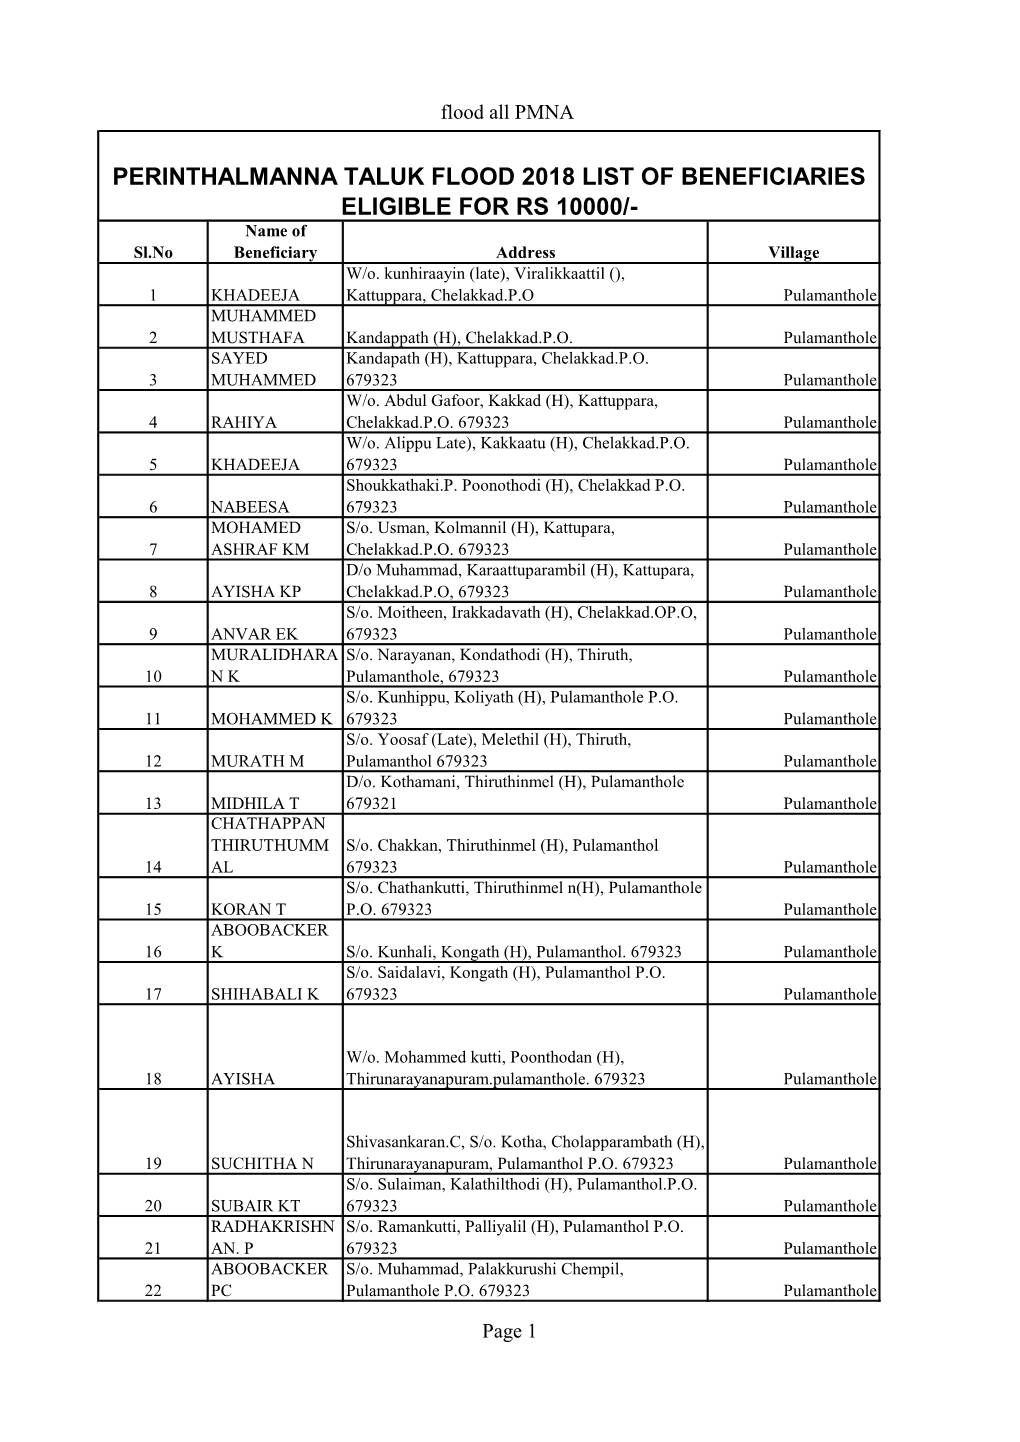 PERINTHALMANNA TALUK FLOOD 2018 LIST of BENEFICIARIES ELIGIBLE for RS 10000/- Name of Sl.No Beneficiary Address Village W/O